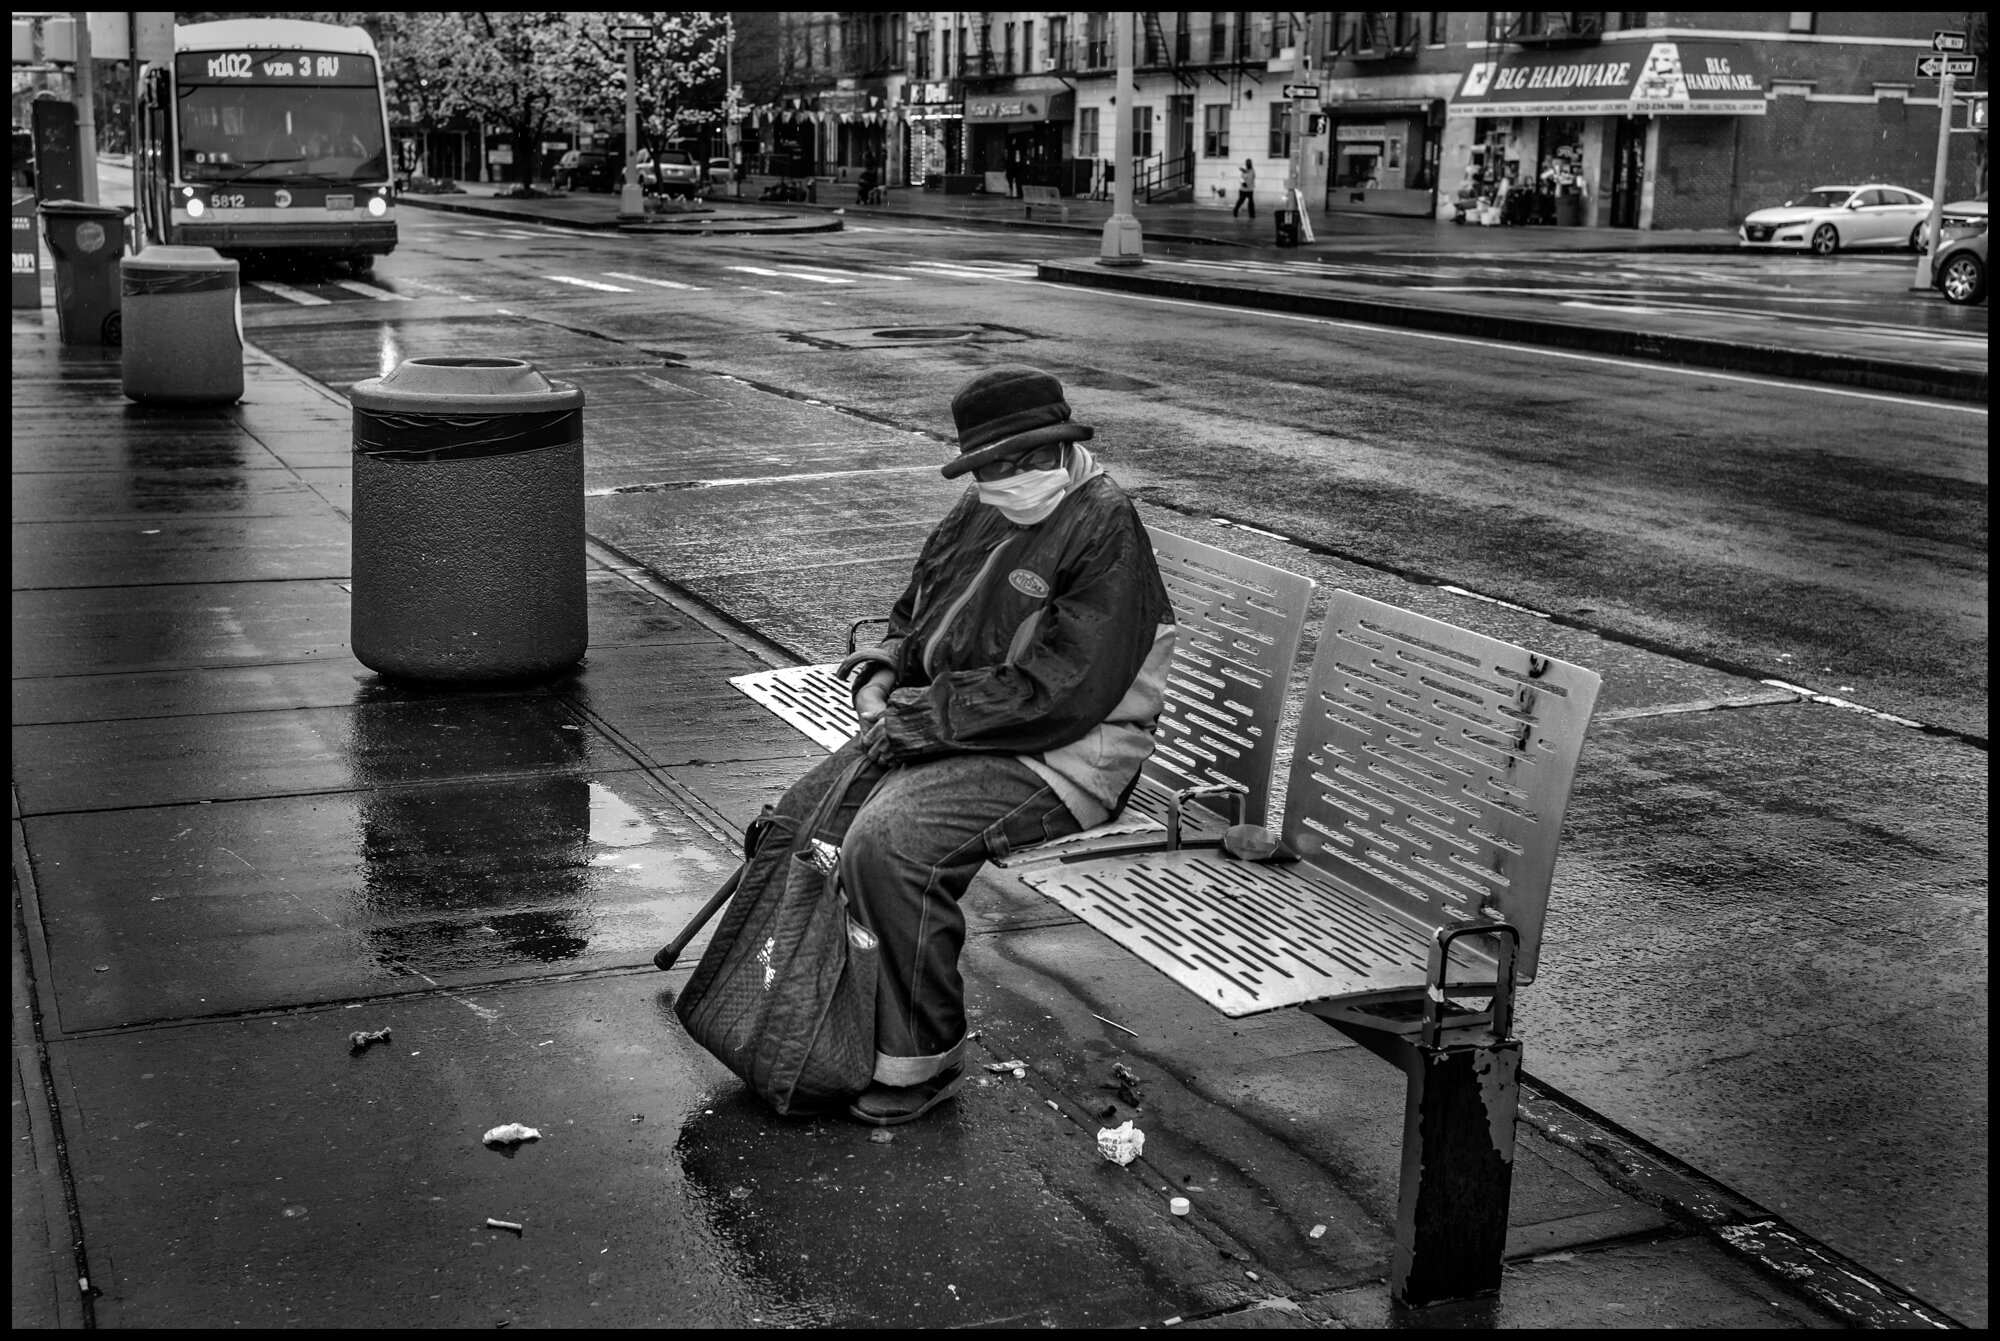  Today, I saw a lone elder woman named Mary, sitting on a bench in the rain at a place only yards from where I lived at 133rd and Lenox in the center of Harlem. We spoke and after asking if I could make a photograph of her, I asked how she was making